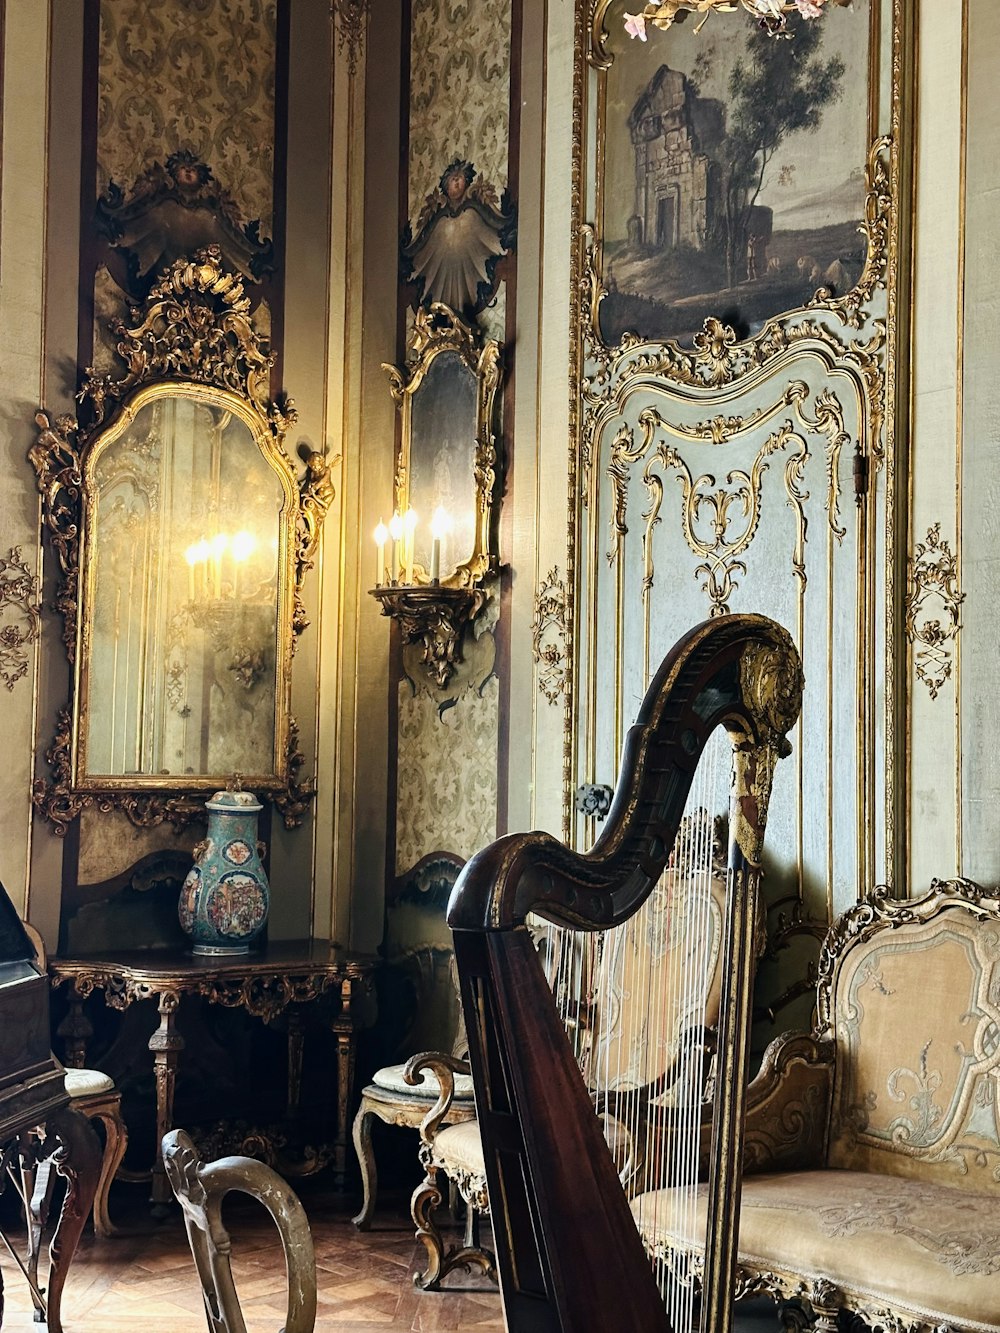 a harp sitting in a room next to a mirror